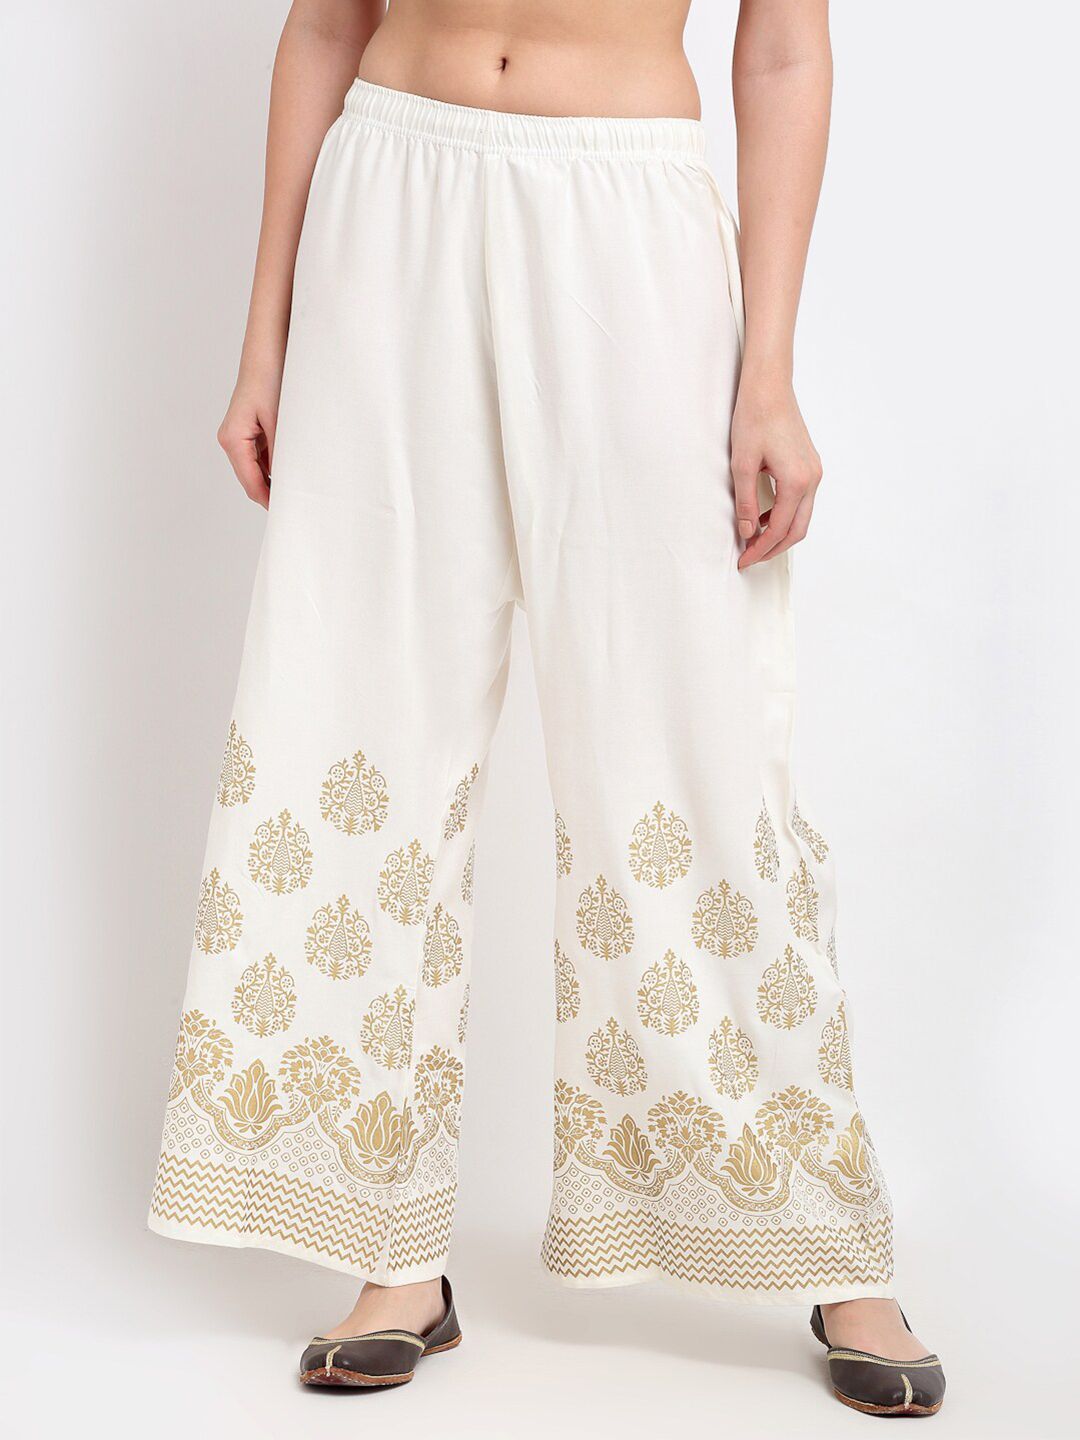 TAG 7 Women White & Gold-Toned Printed Flared Palazzos Price in India